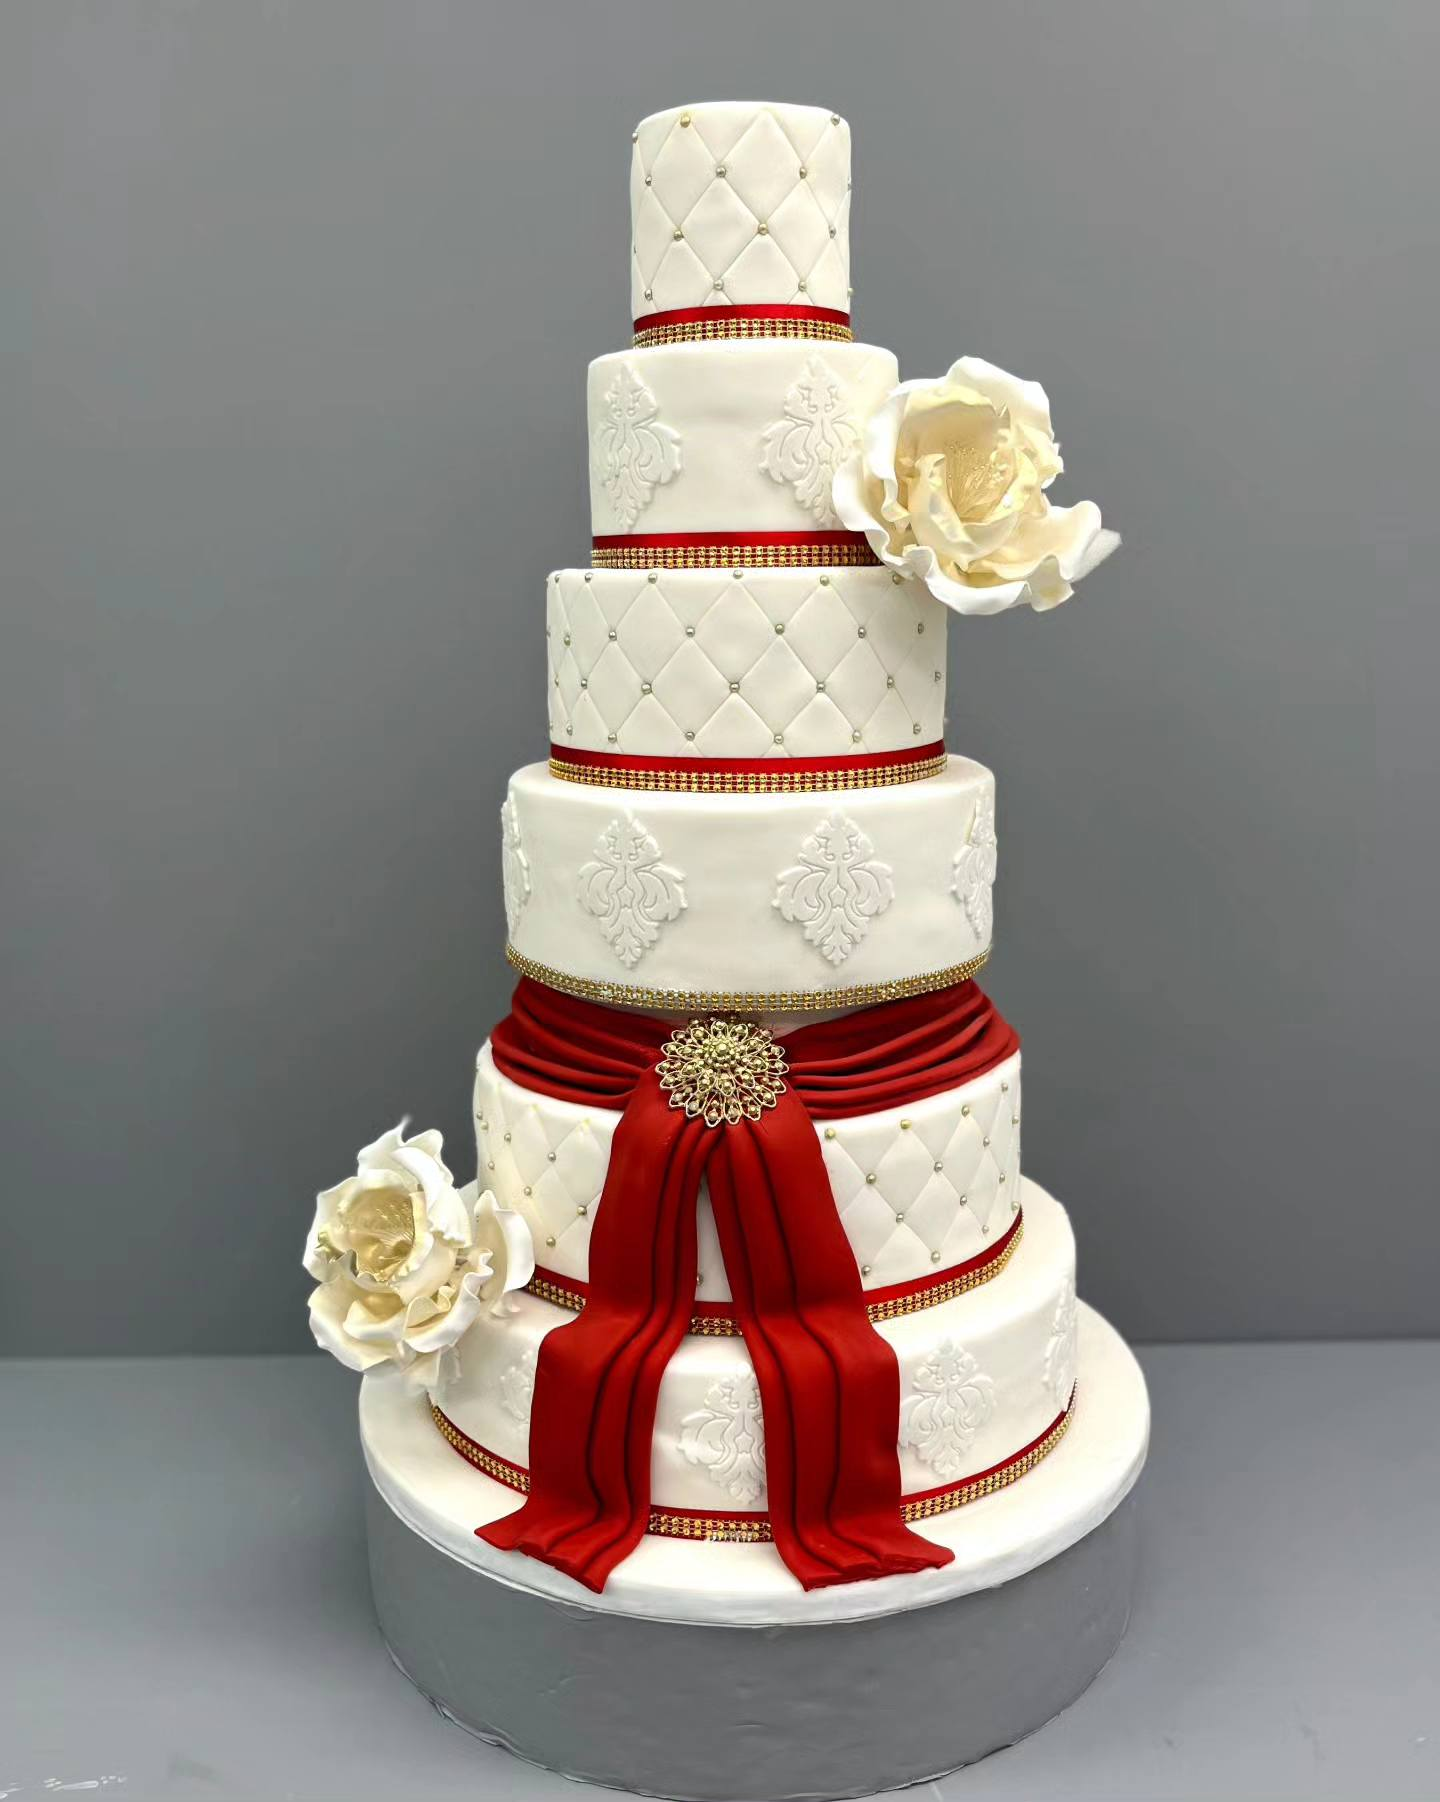 A Slice of Love: The Artistry and Significance of Wedding Cakes with Just Temptation